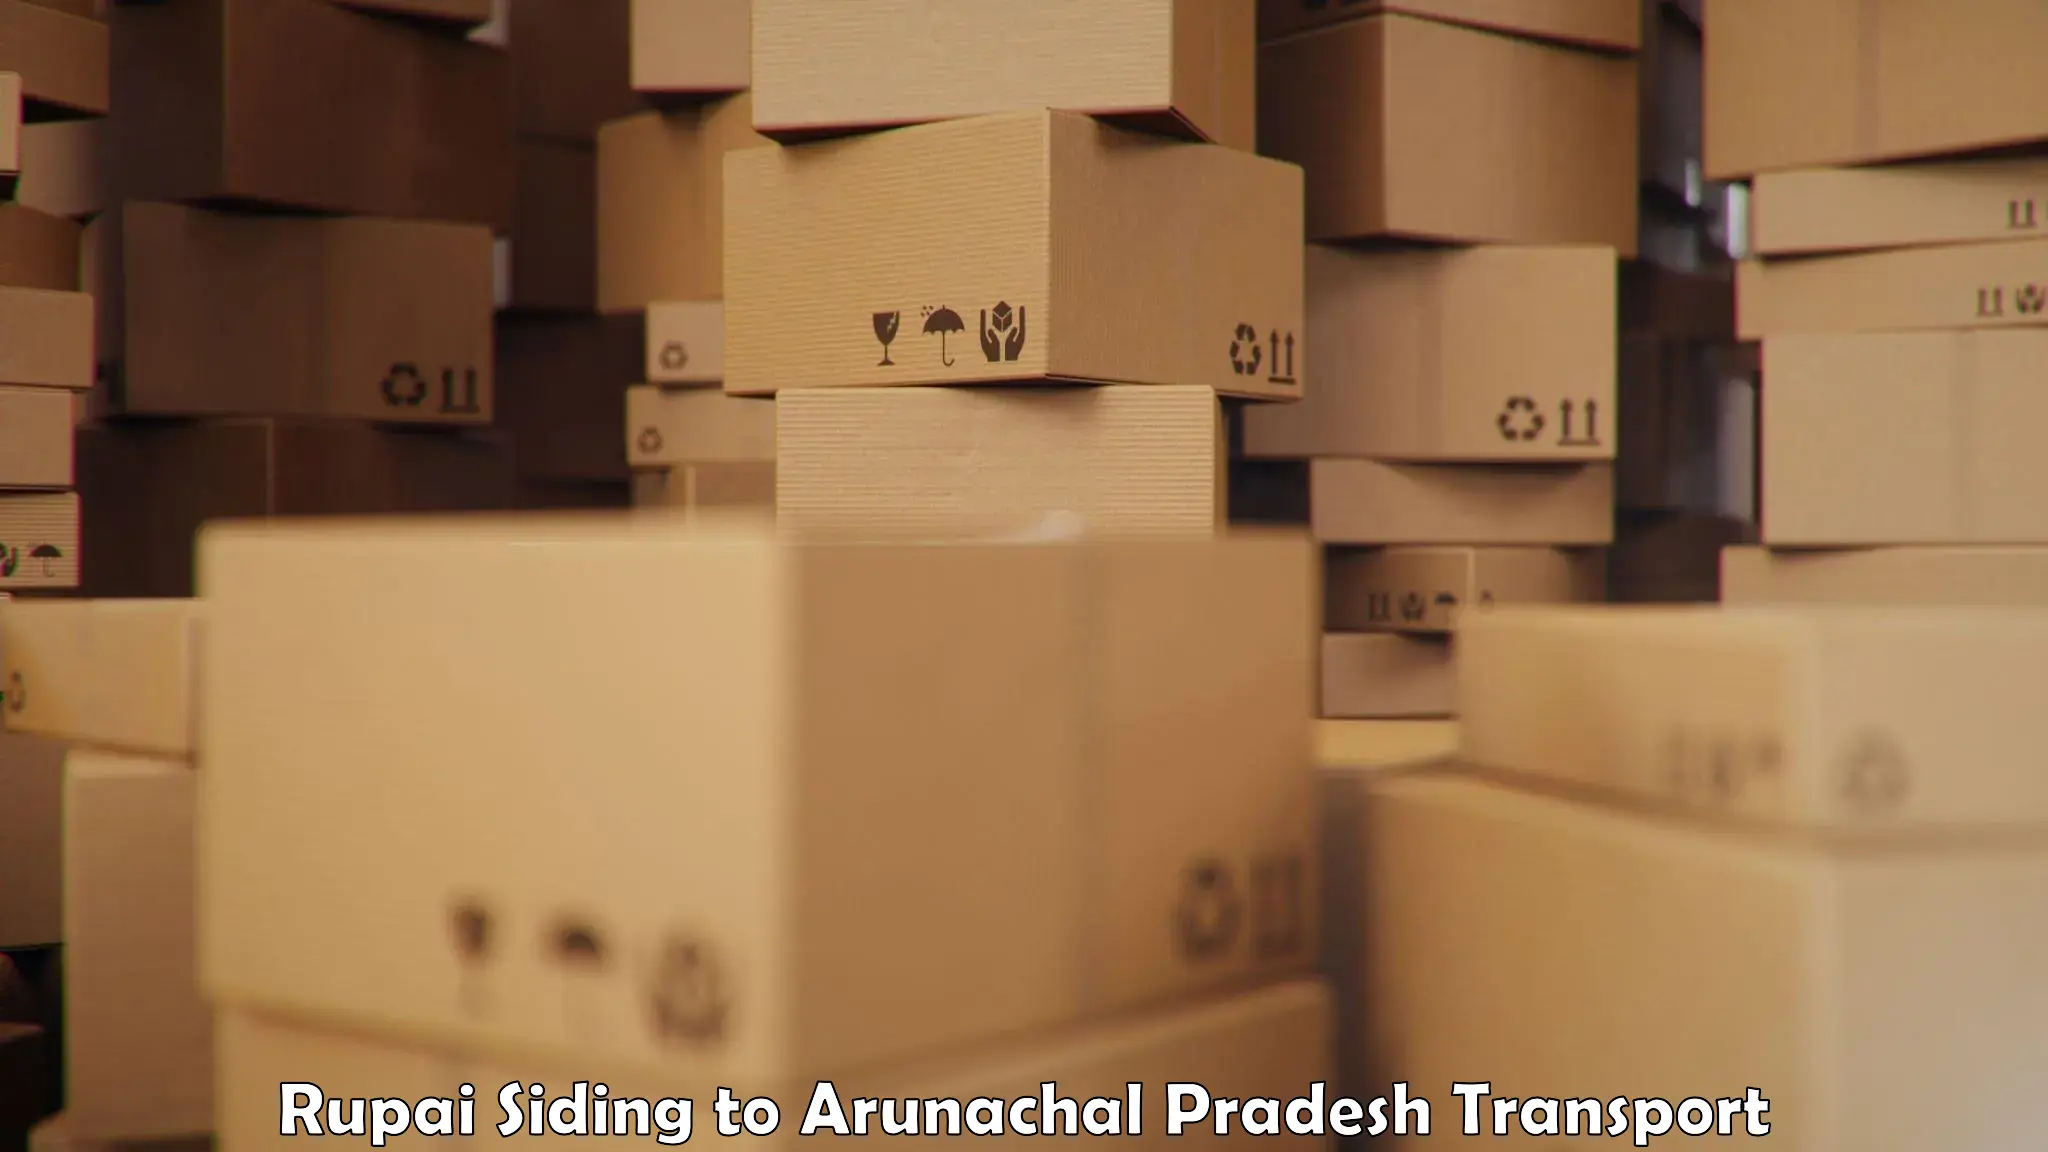 Truck transport companies in India Rupai Siding to Lohit